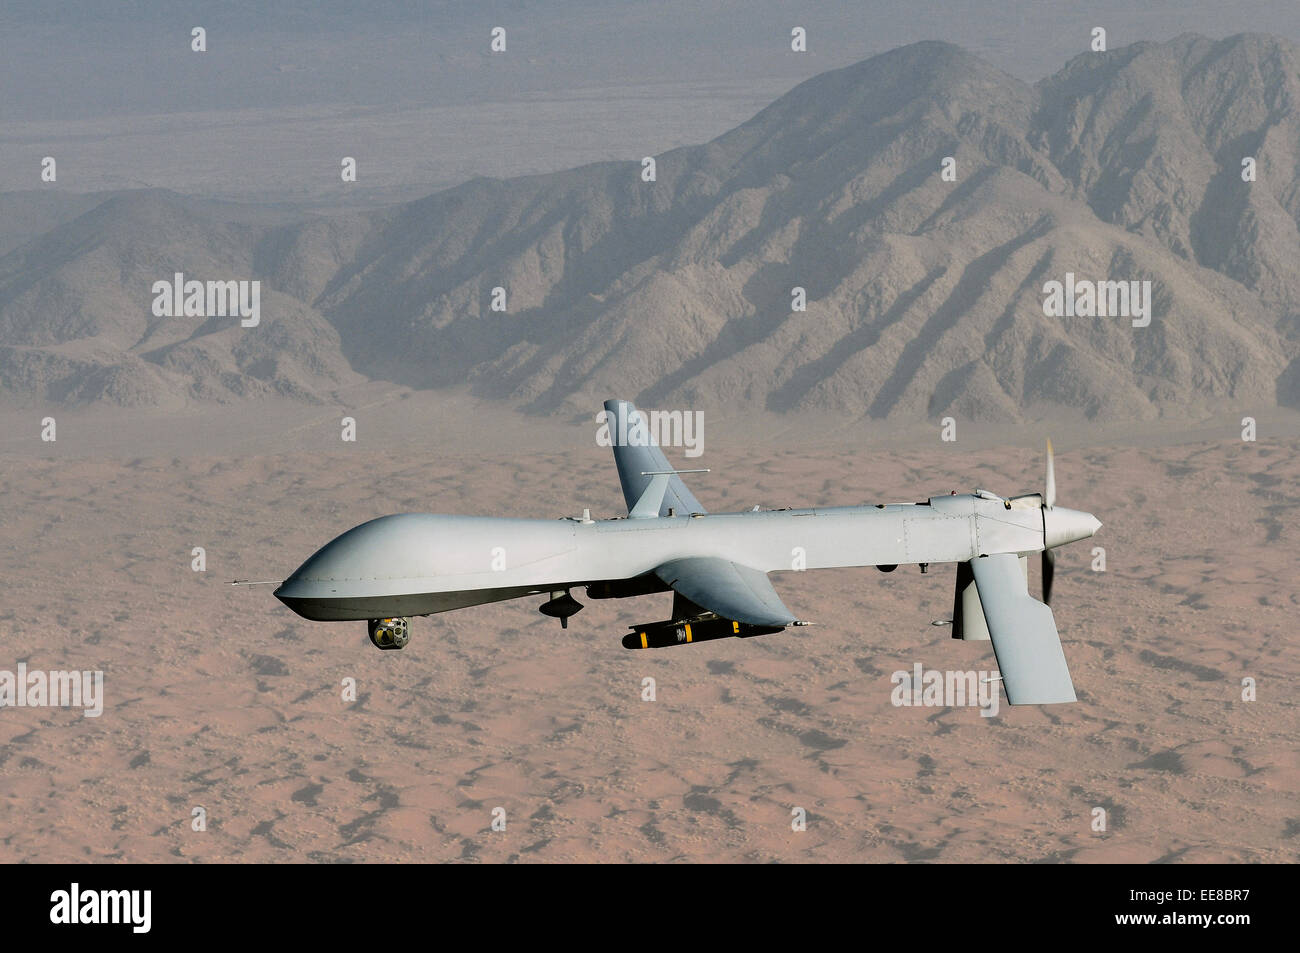 Armed MQ-1 Predator unmanned aircraft carrying 2 Hellfire missiles flying over desert landscape Stock Photo